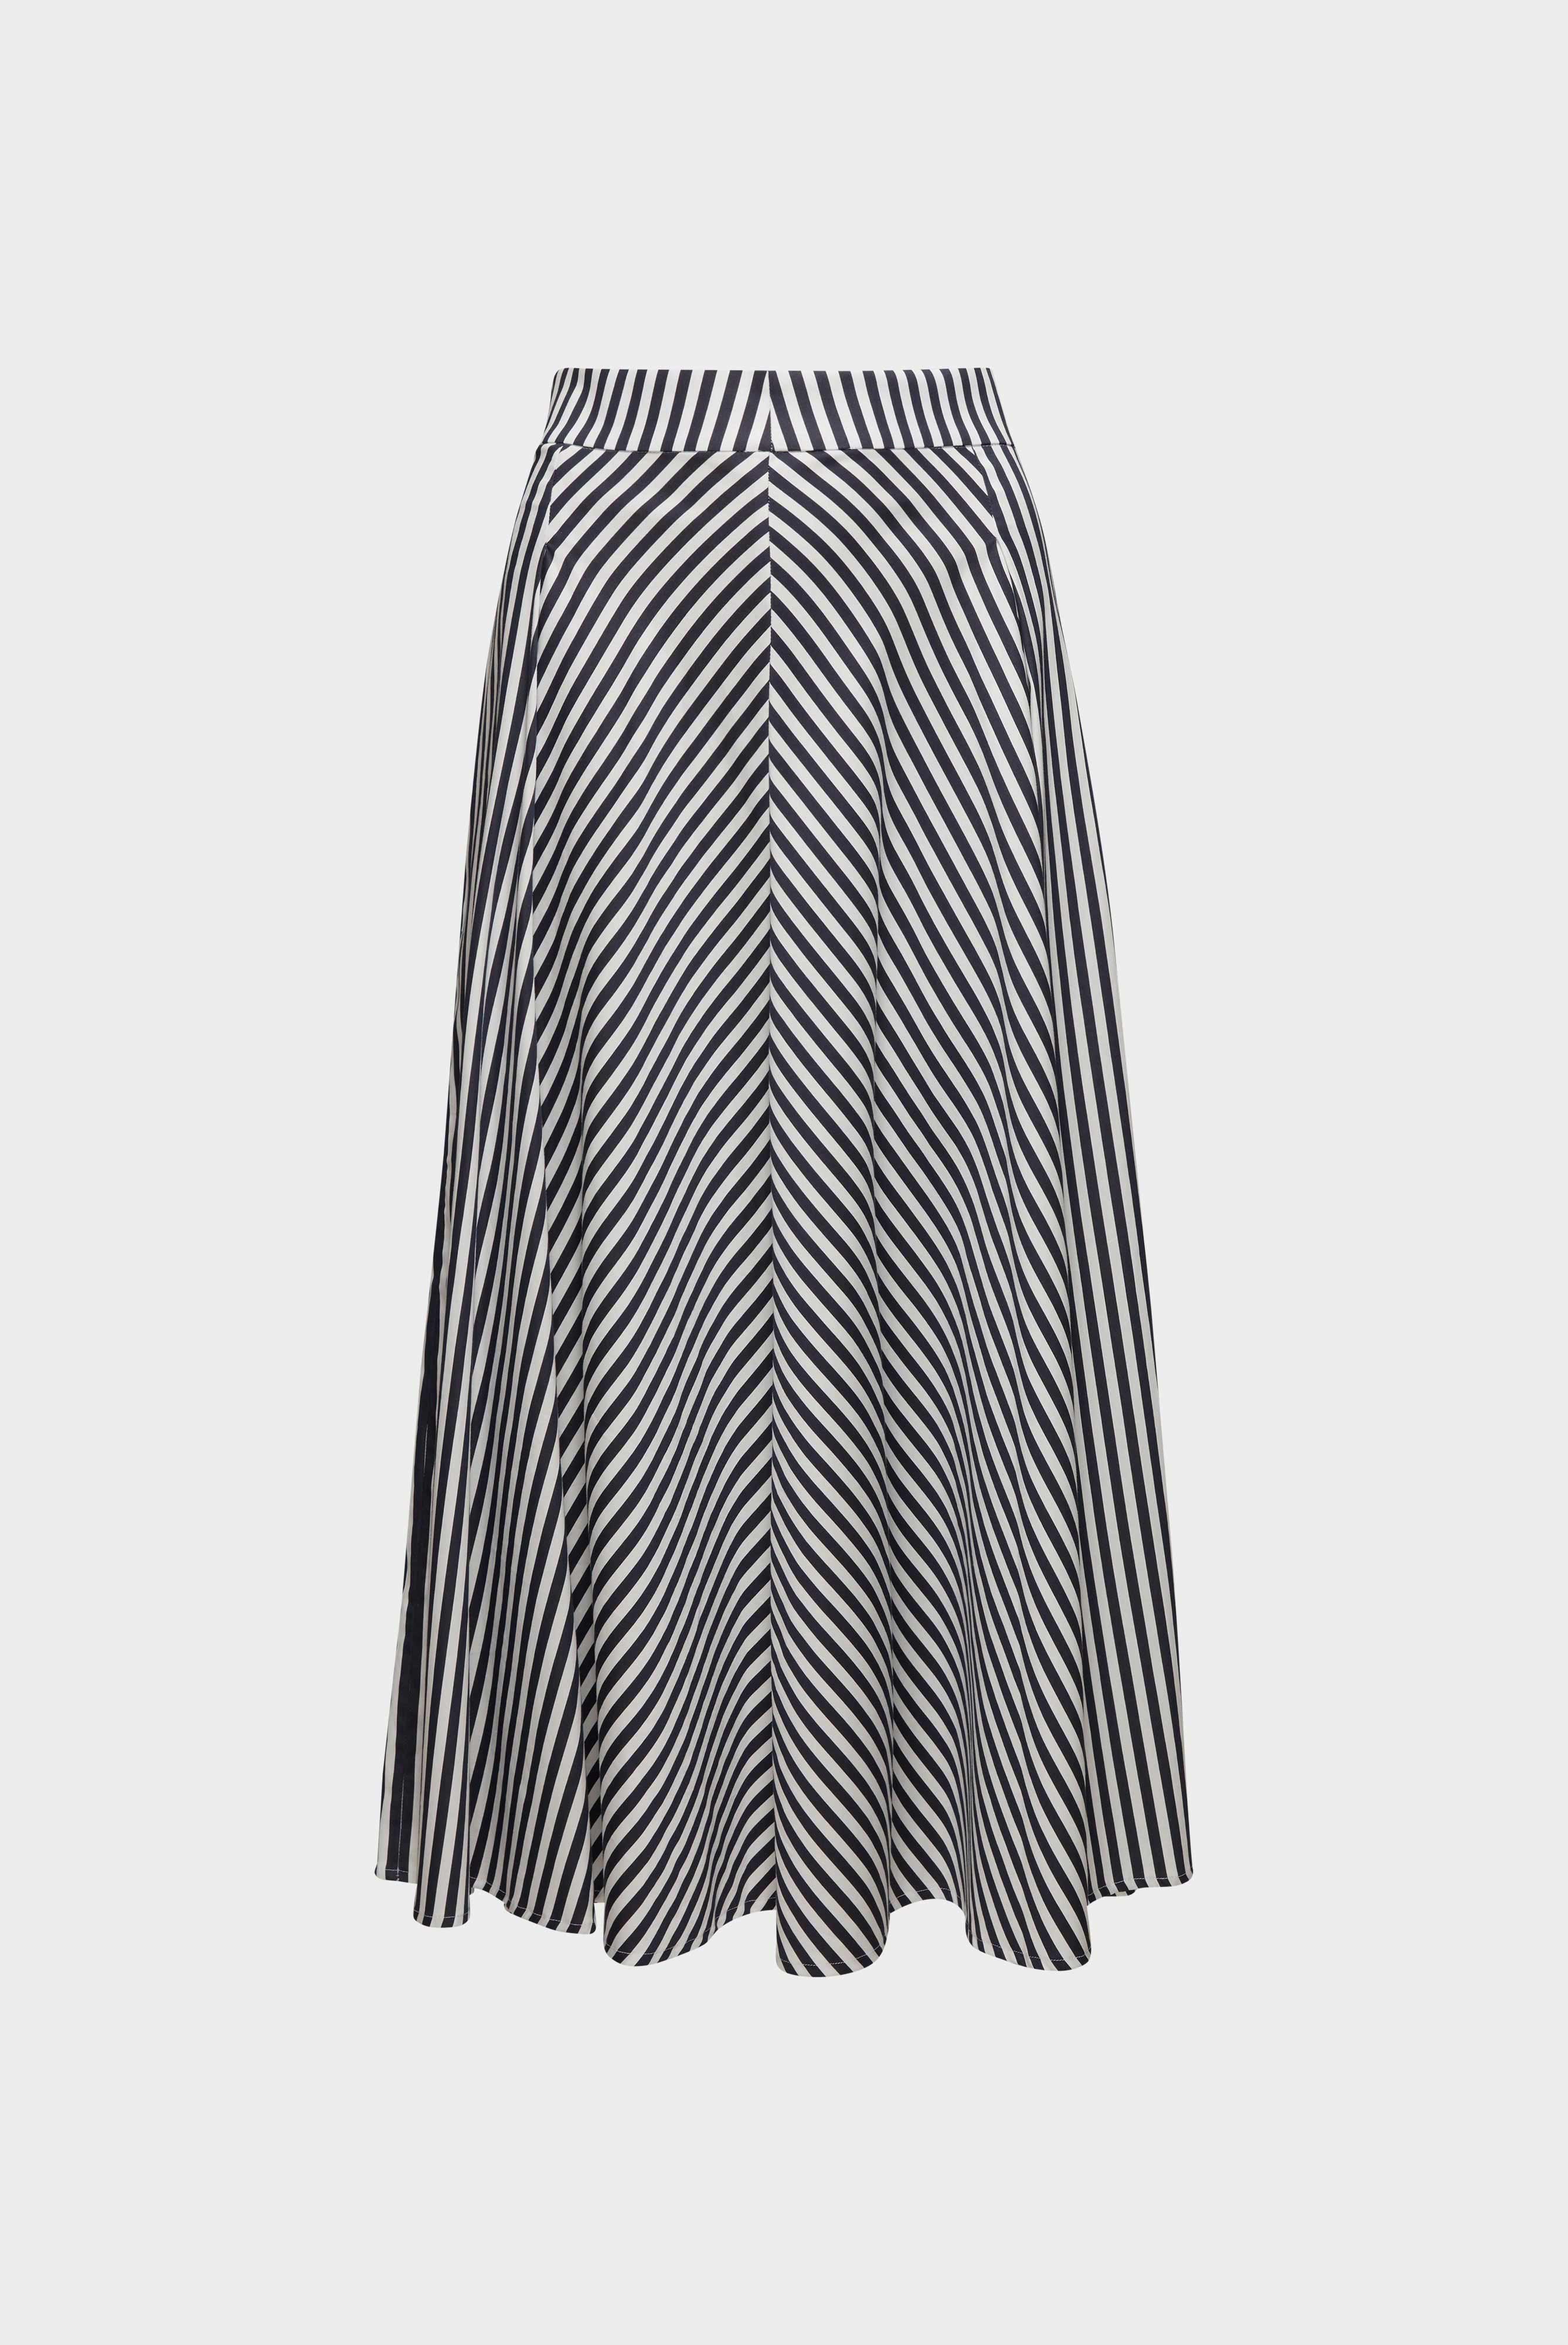 Dresses & Skirts+Skirt in Cotton Stretch with Stripe Pattern+05.659A..171959.790.36